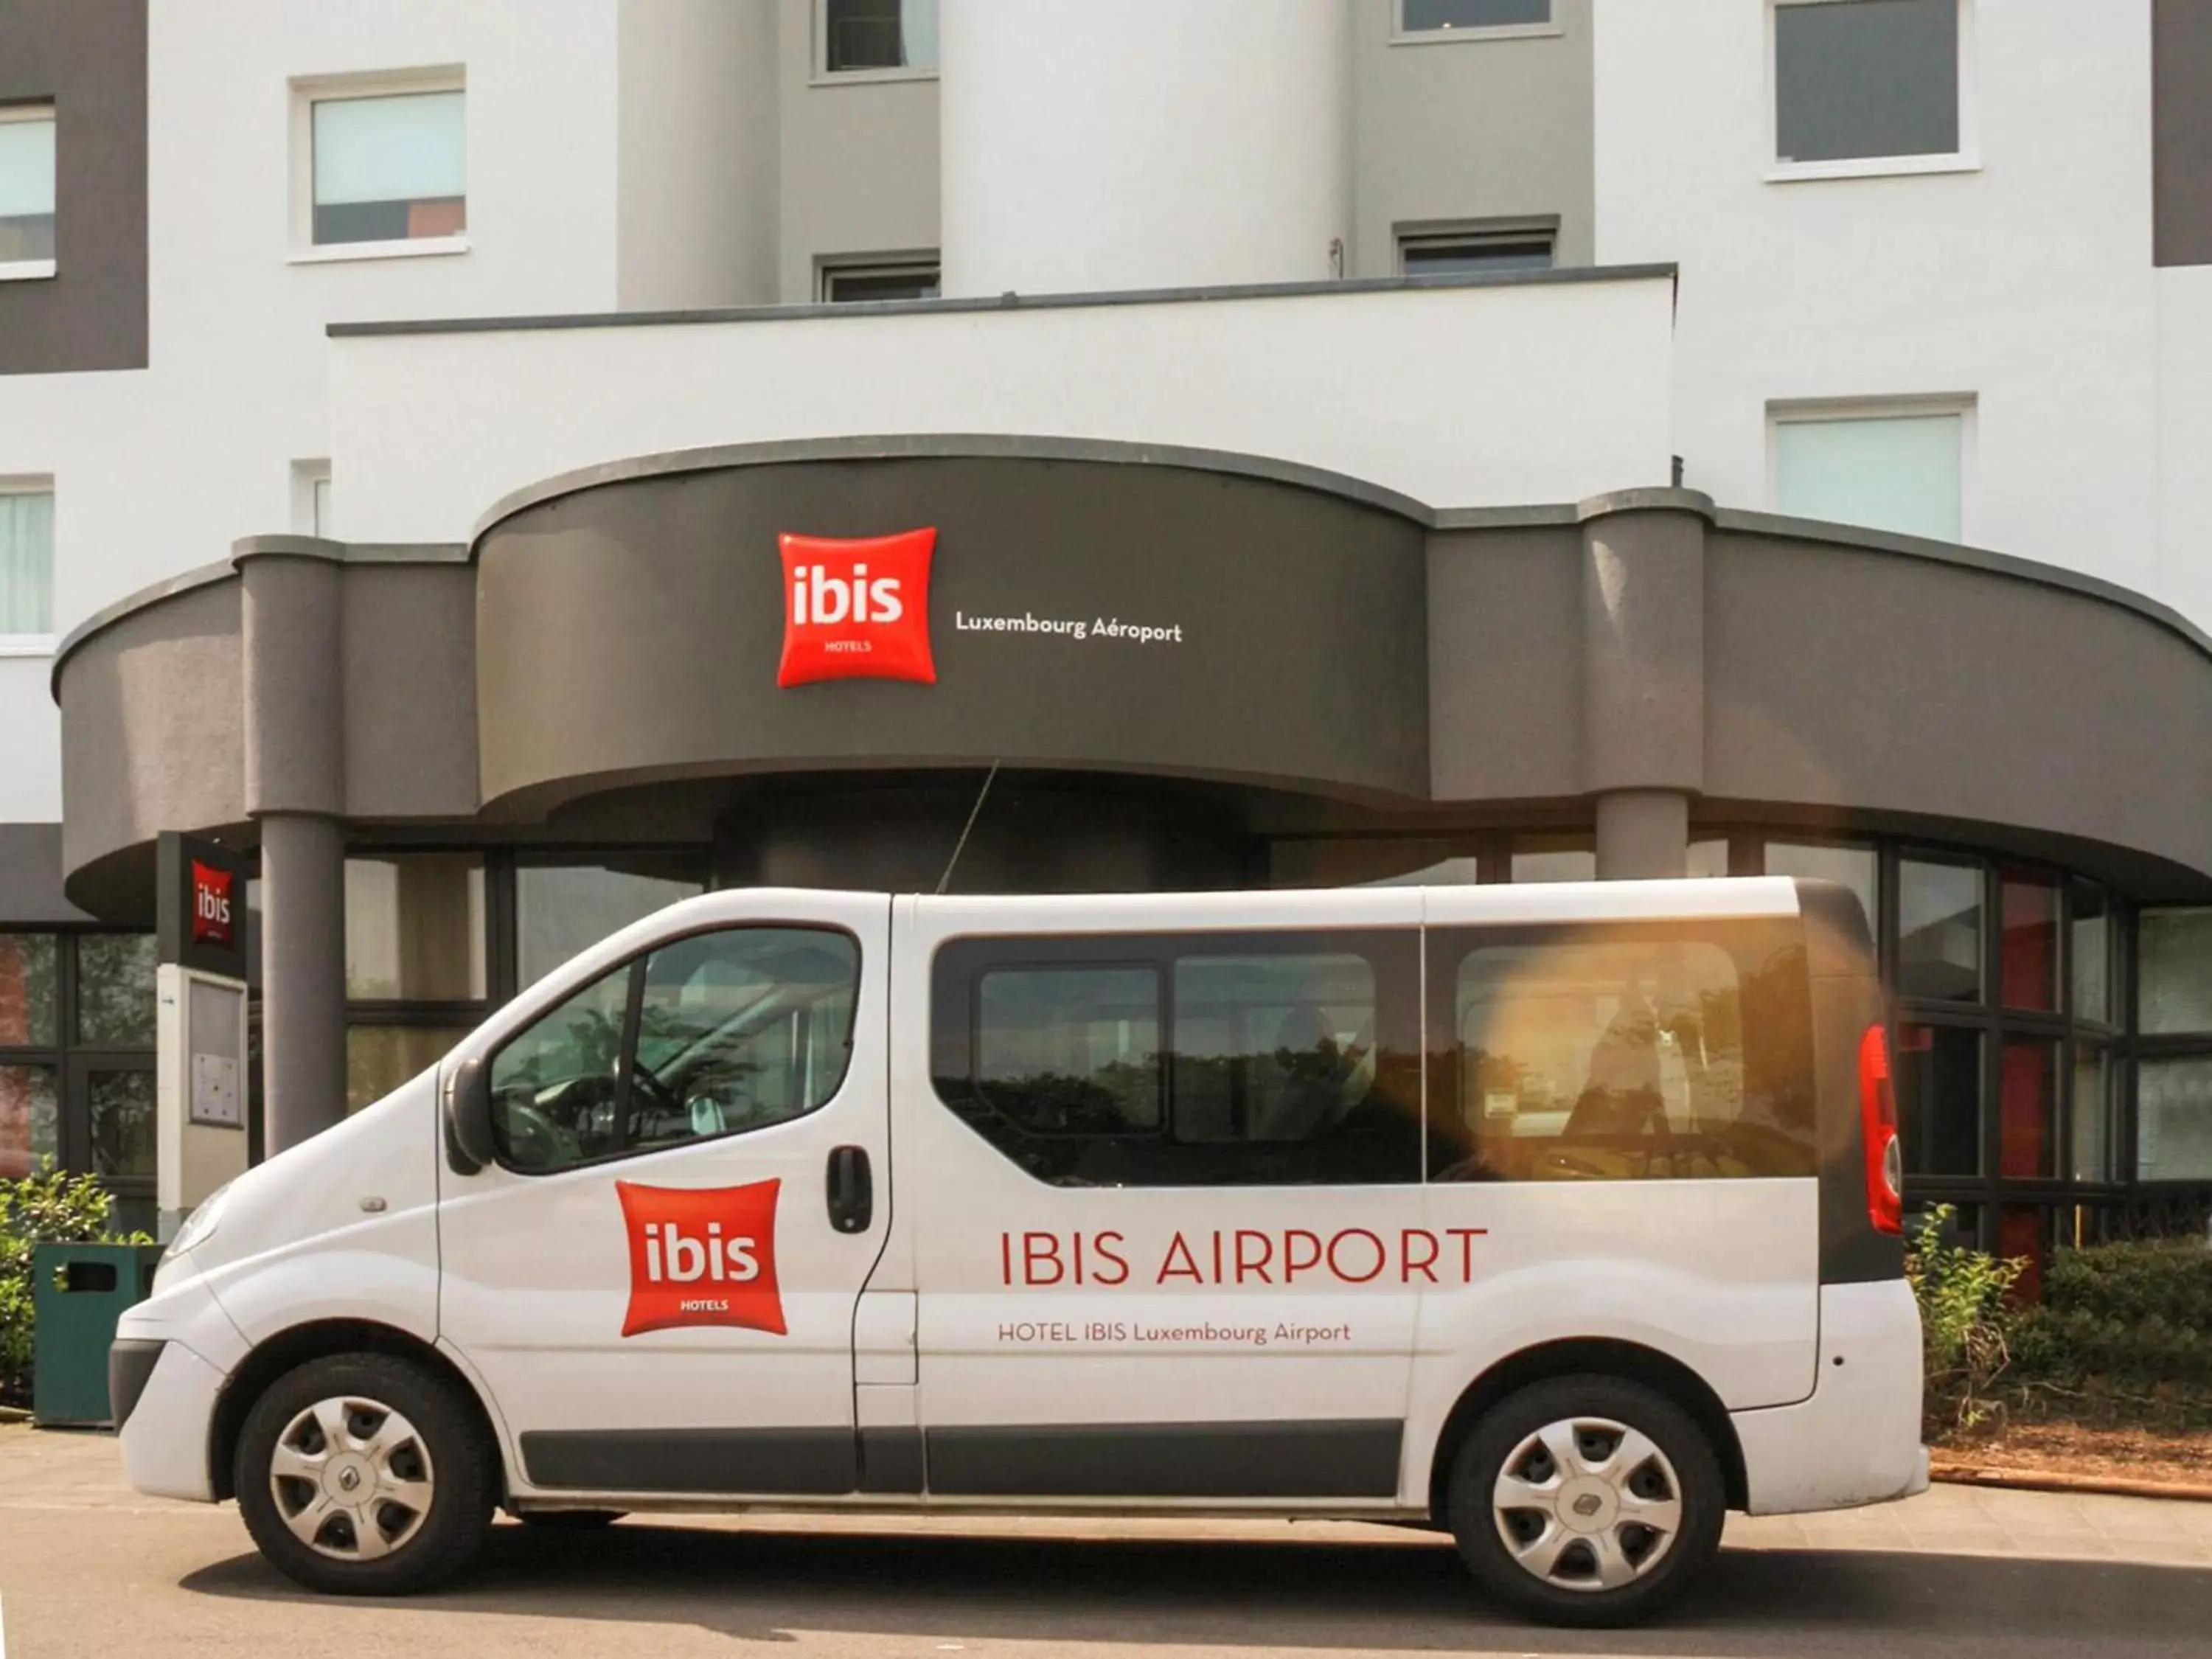 Property building in Ibis Luxembourg Airport